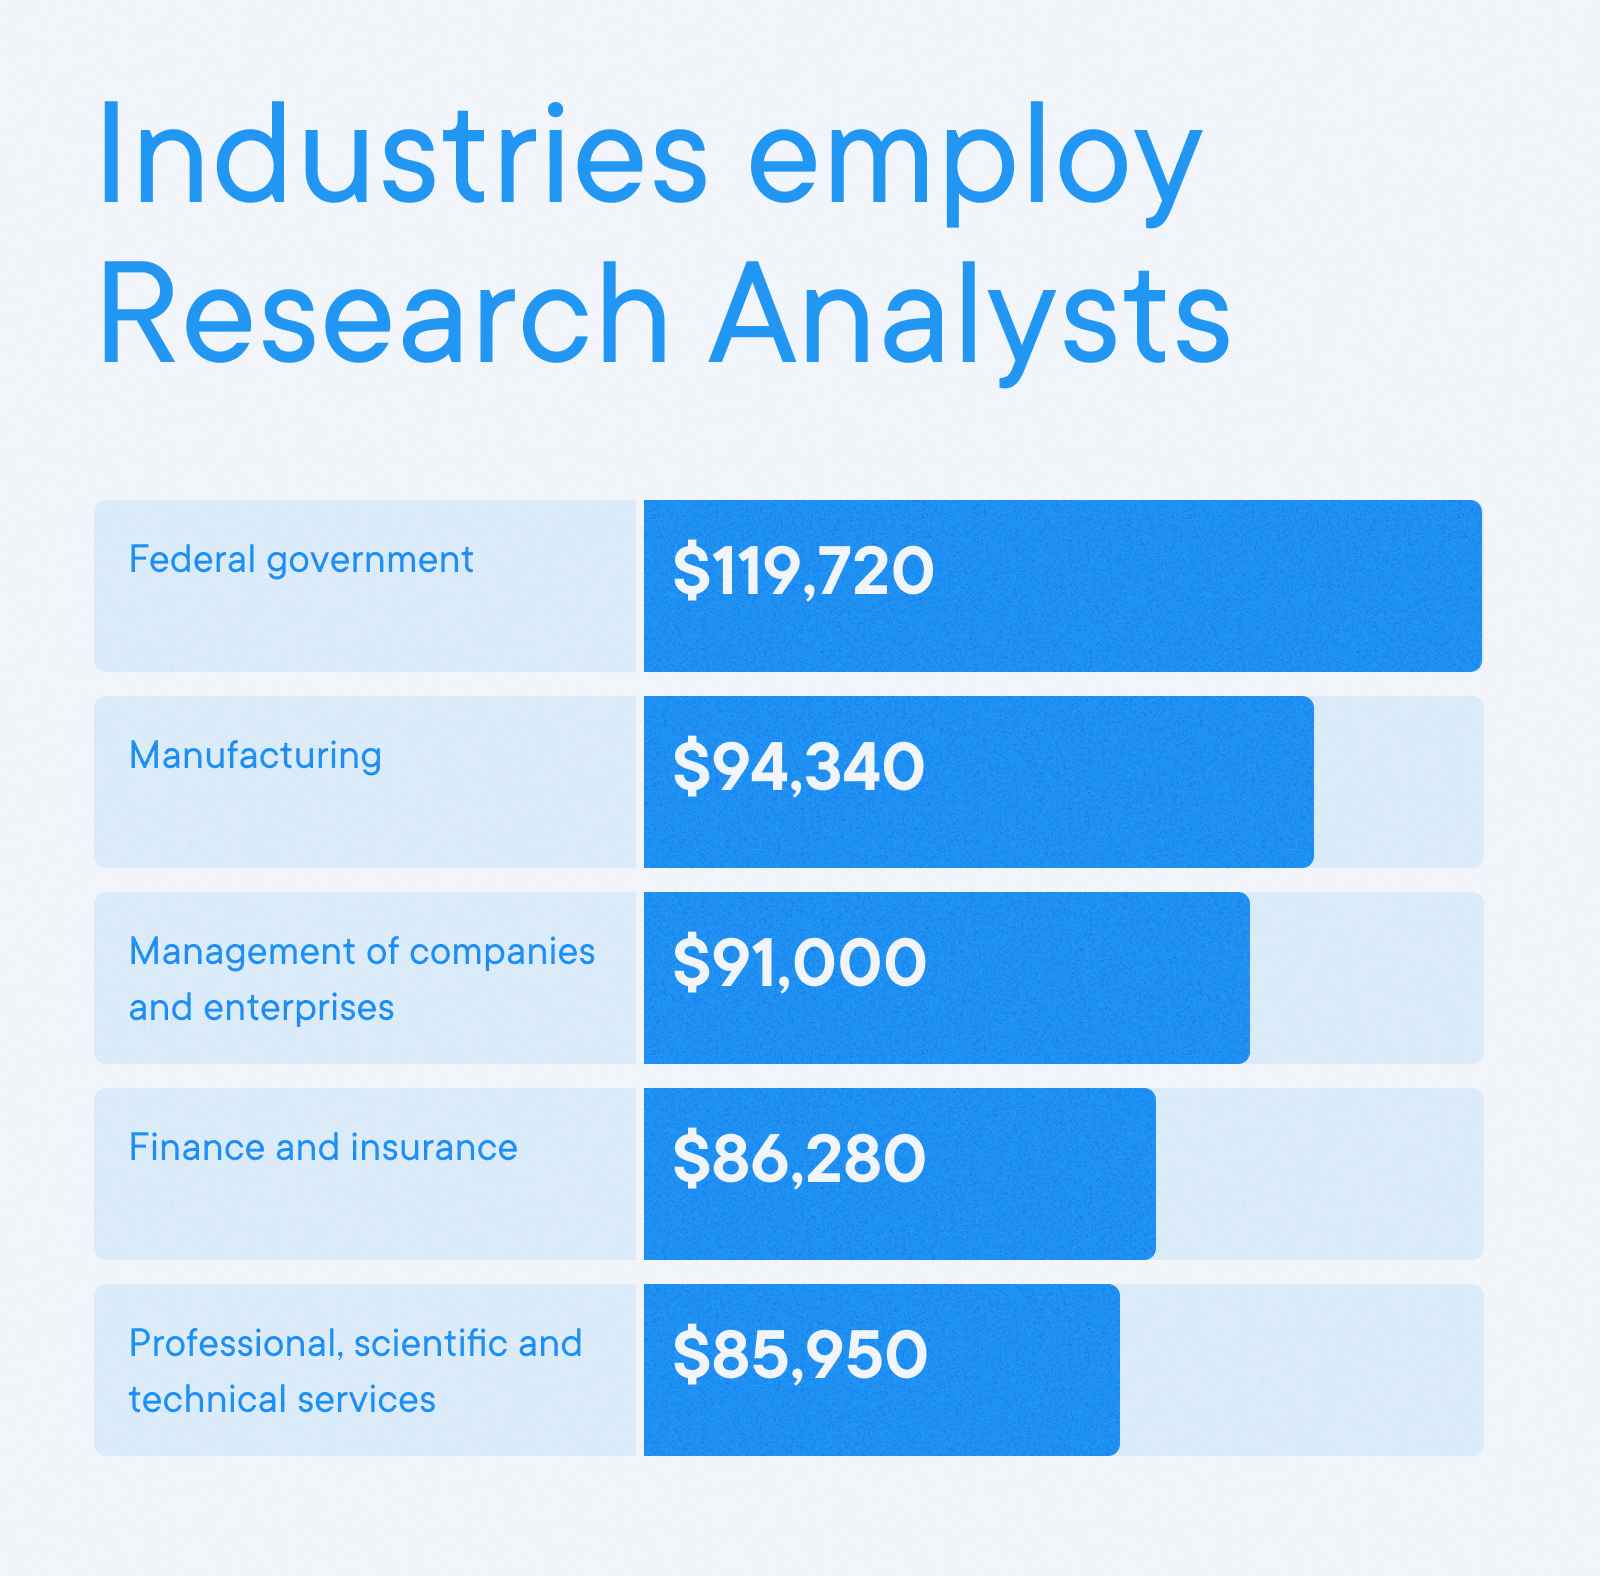 Data Analyst Cover Letter Example - Industries employ Research Analysts